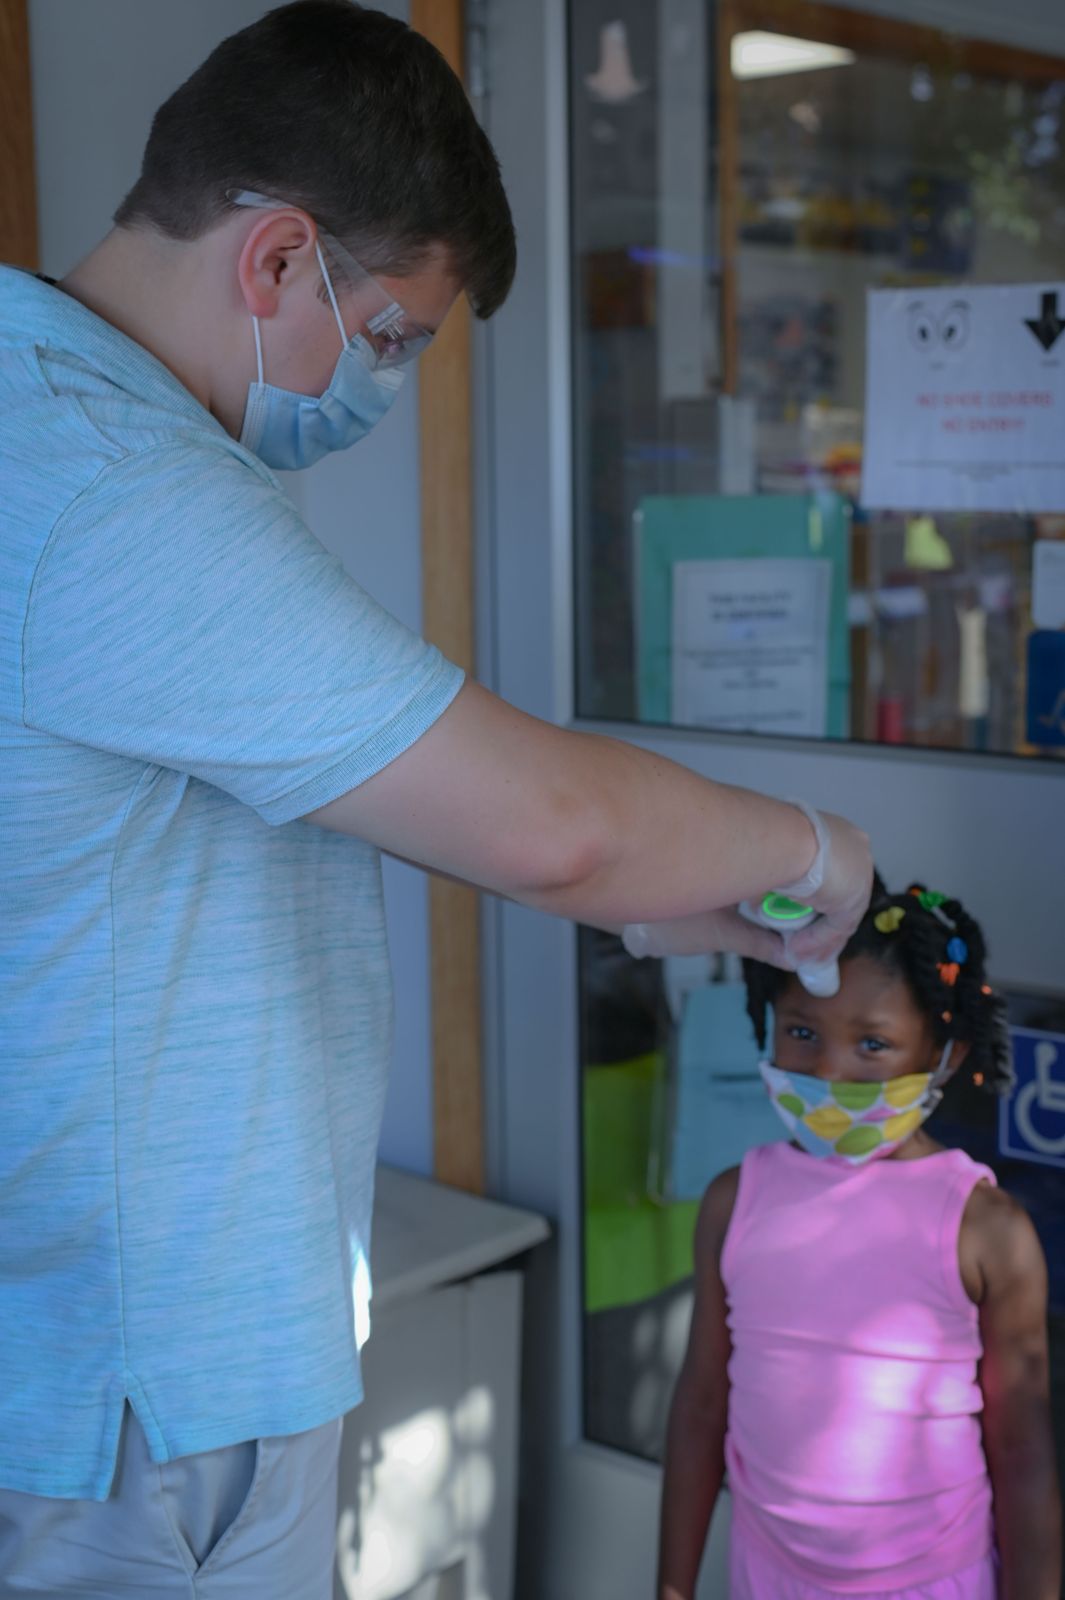 A man wearing a surgical mask uses a forehead thermometer on a young girl